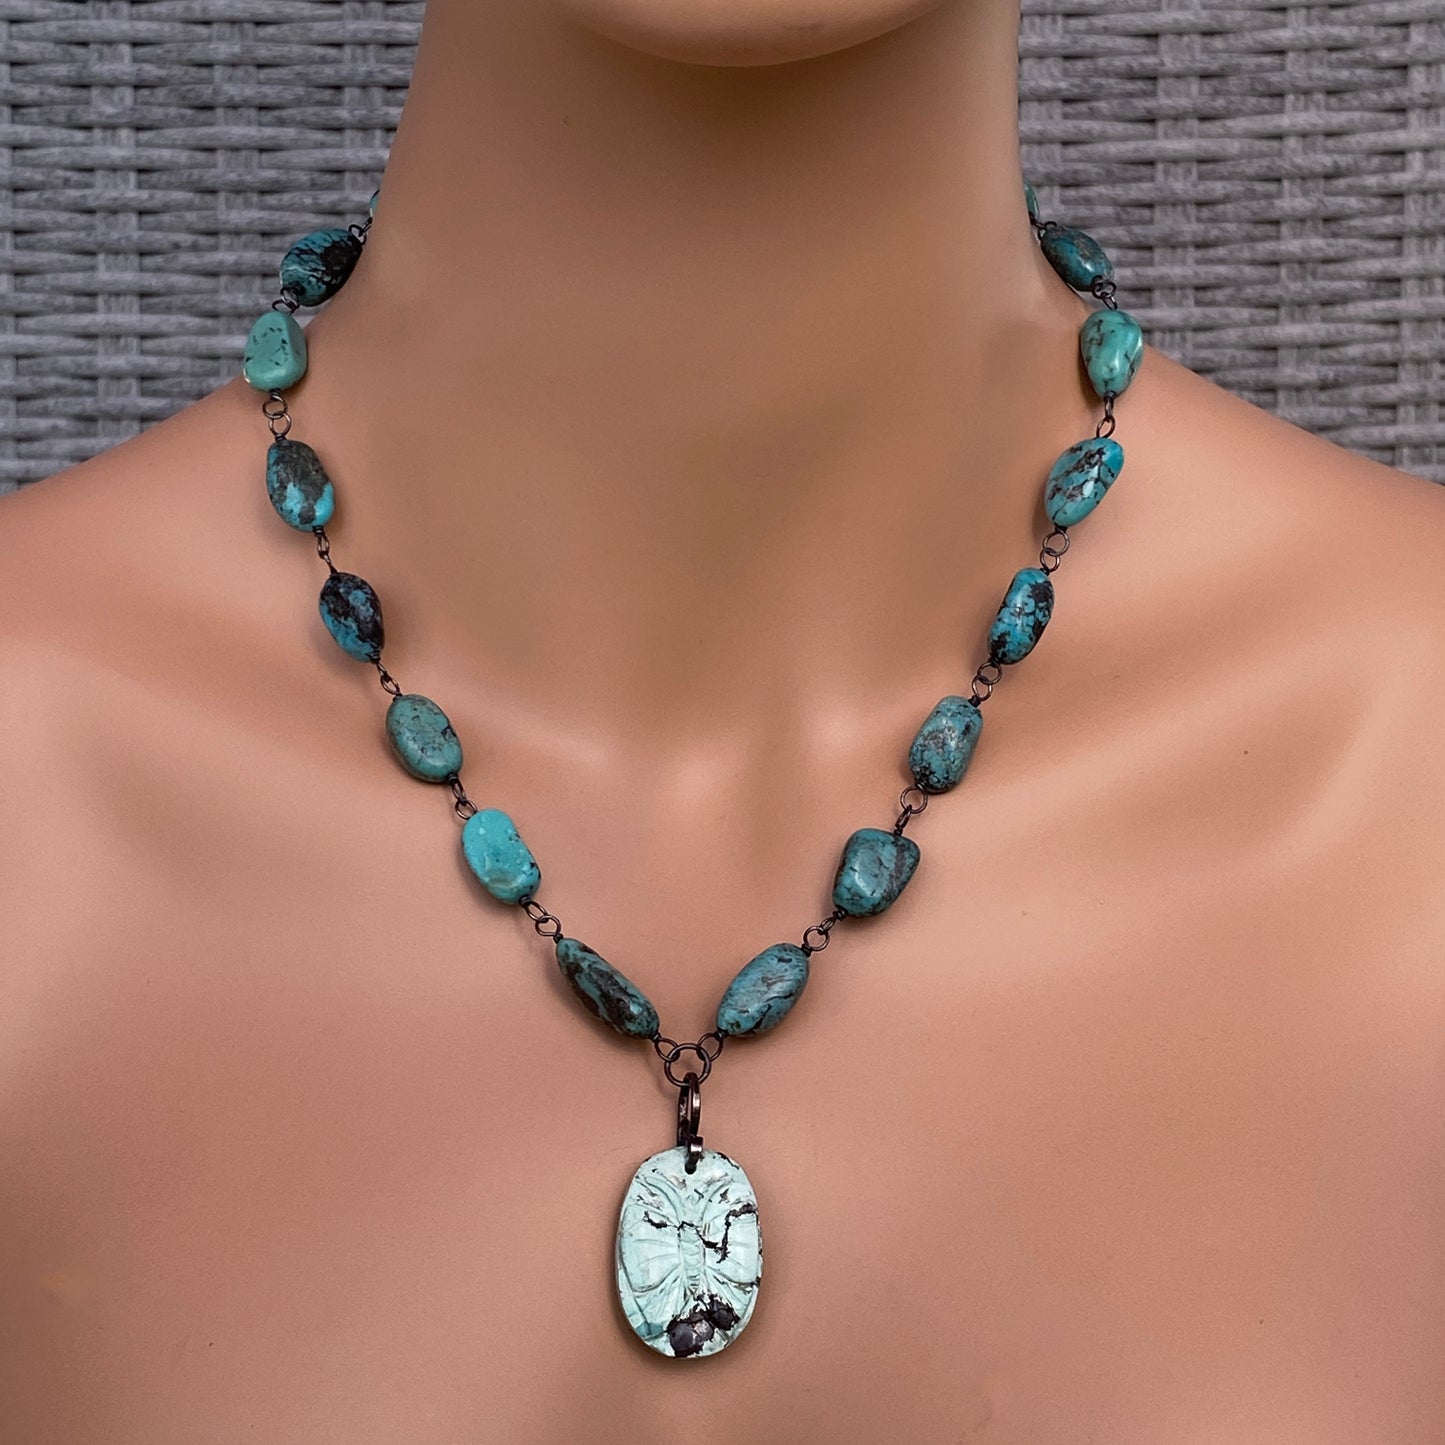 Turquoise Butterfly Necklace